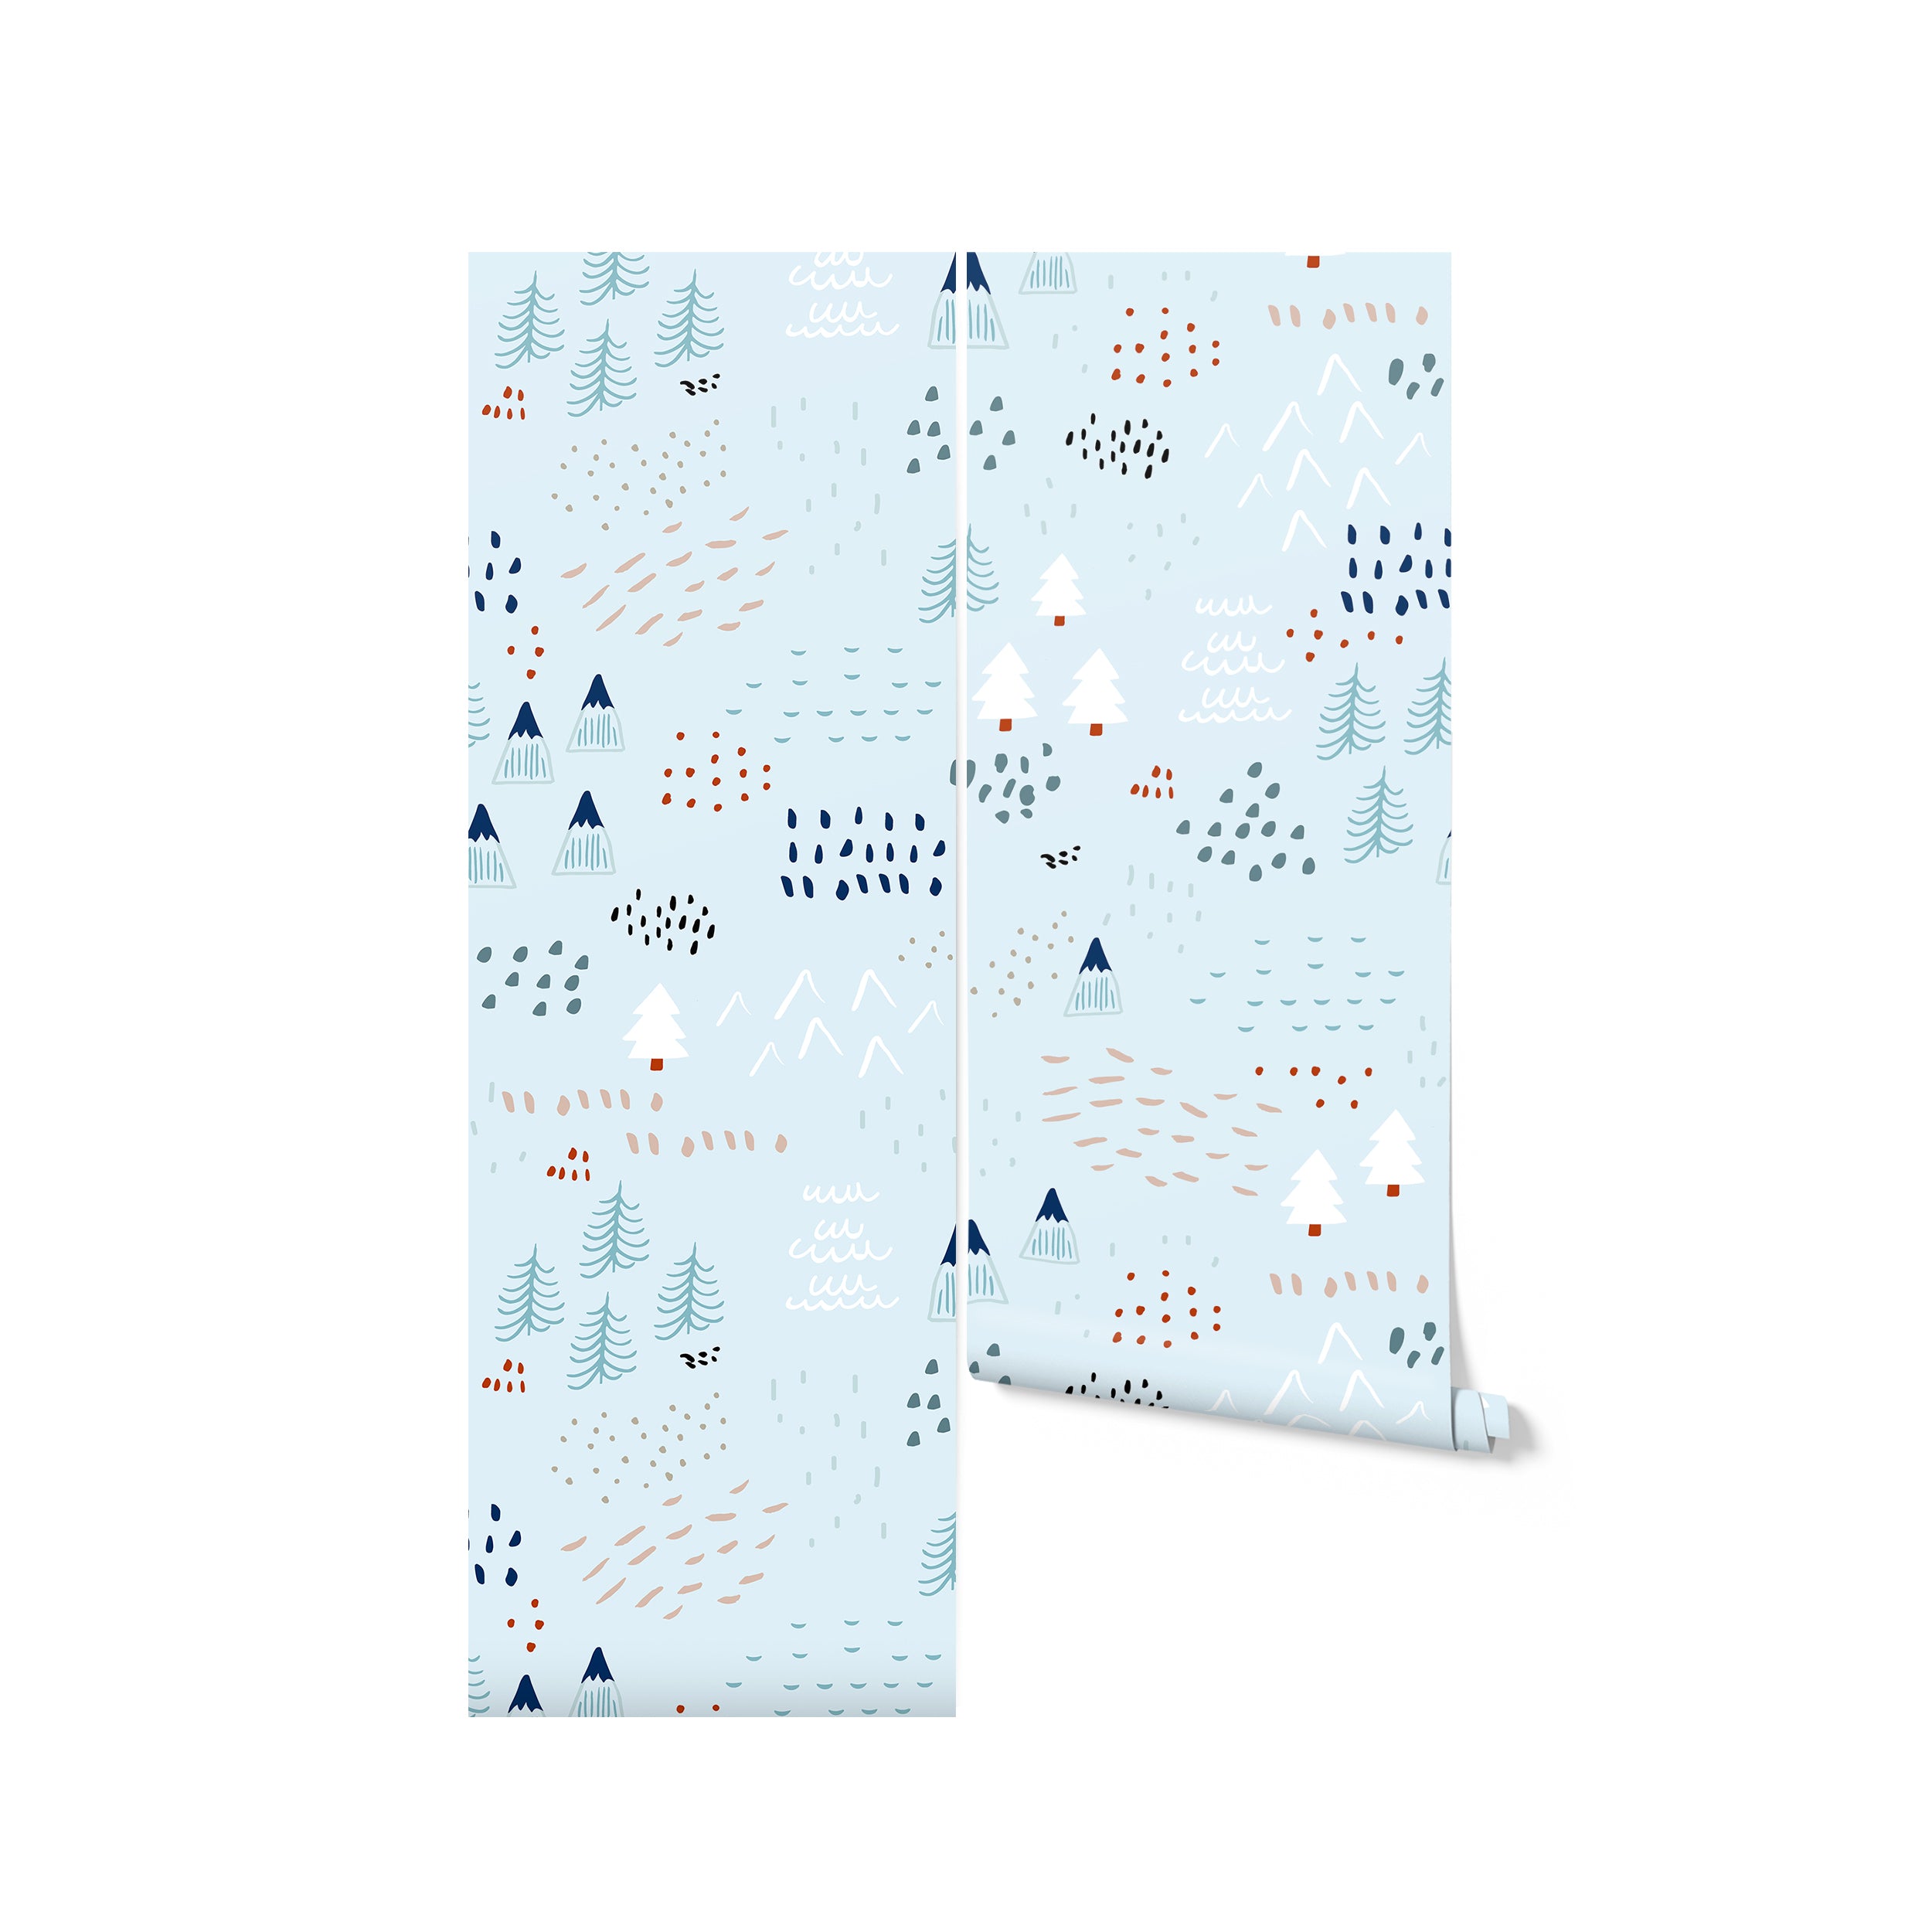 A roll of "Nordic Adventure Wallpaper" showcasing a playful and abstract pattern of trees, mountains, and scattered elements in cool tones of blue, white, and touches of orange. This design is perfect for adding a sense of outdoor adventure to any child's room or play area.